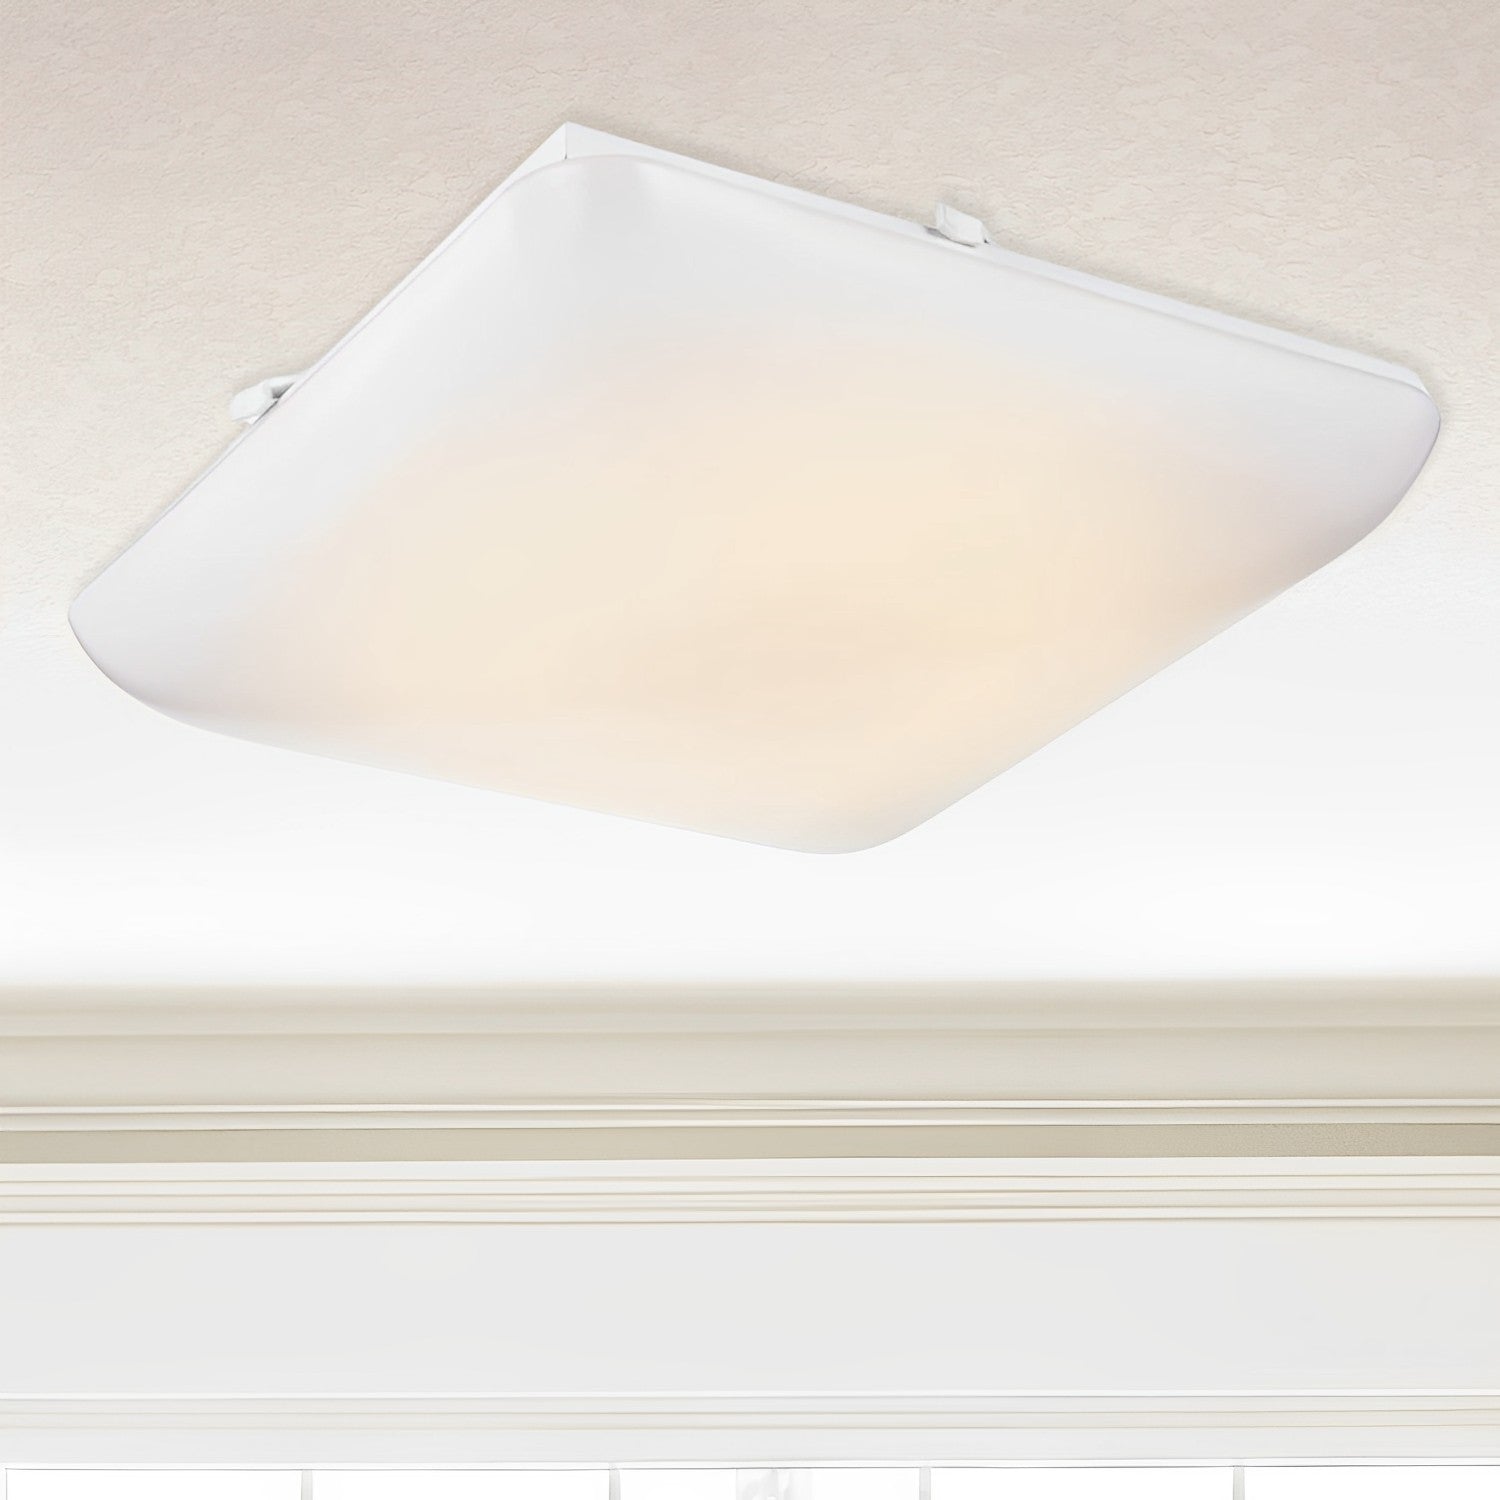 Square LED Puff Ceiling Light, Cloud, White, Surface Mount, 120-277V, 3200 Lumens